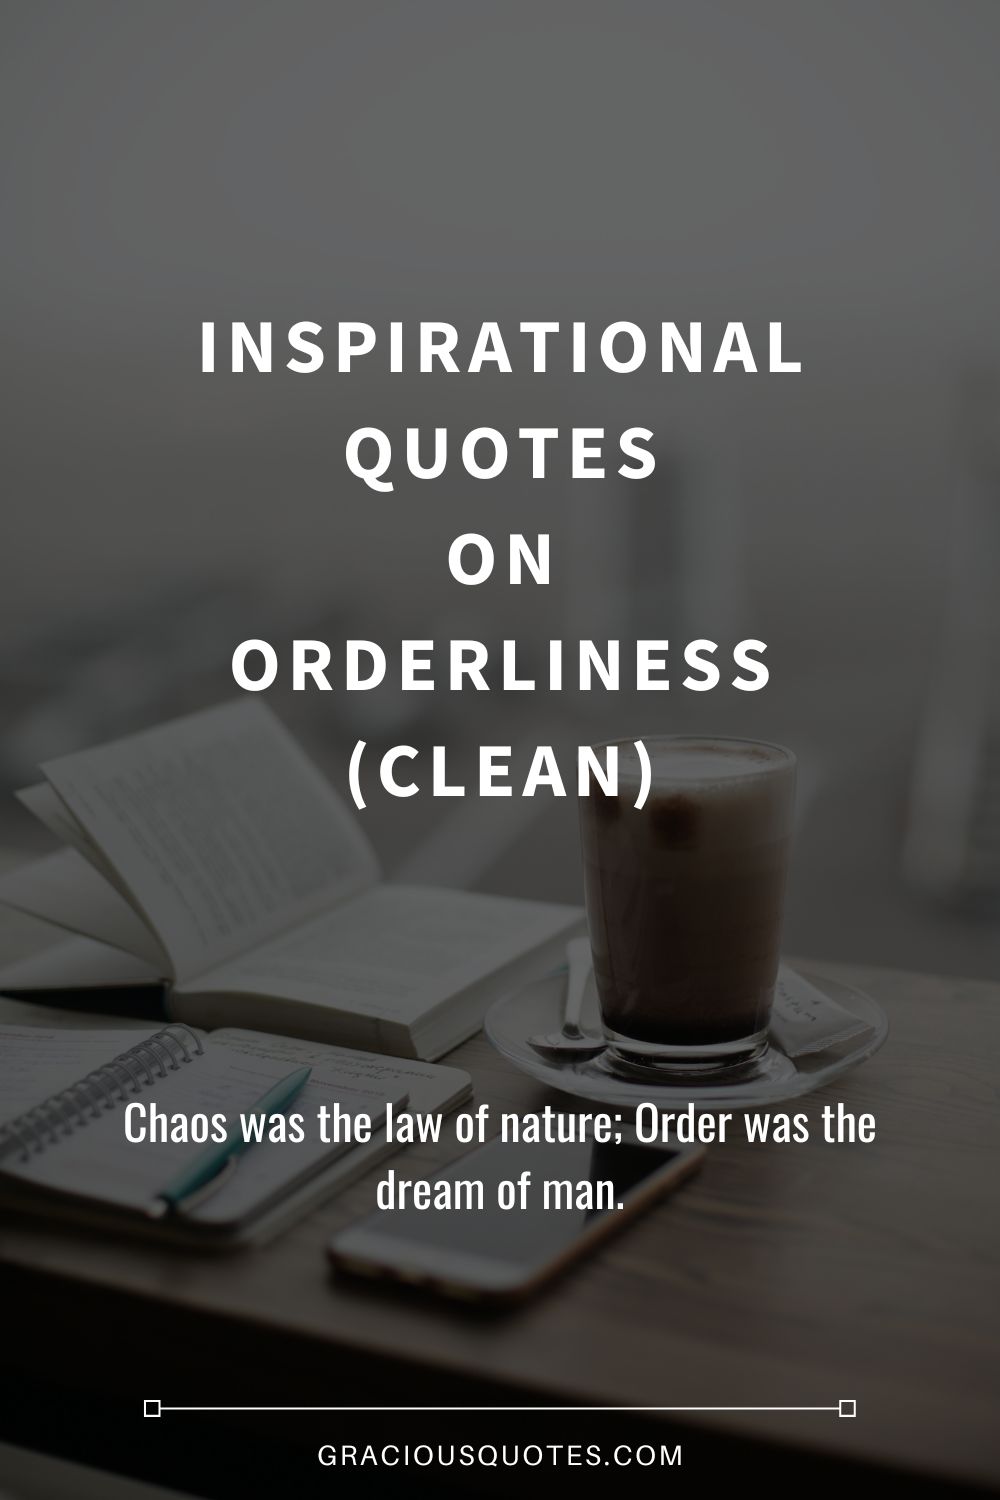 Inspirational Quotes on Orderliness (CLEAN) - Gracious Quotes